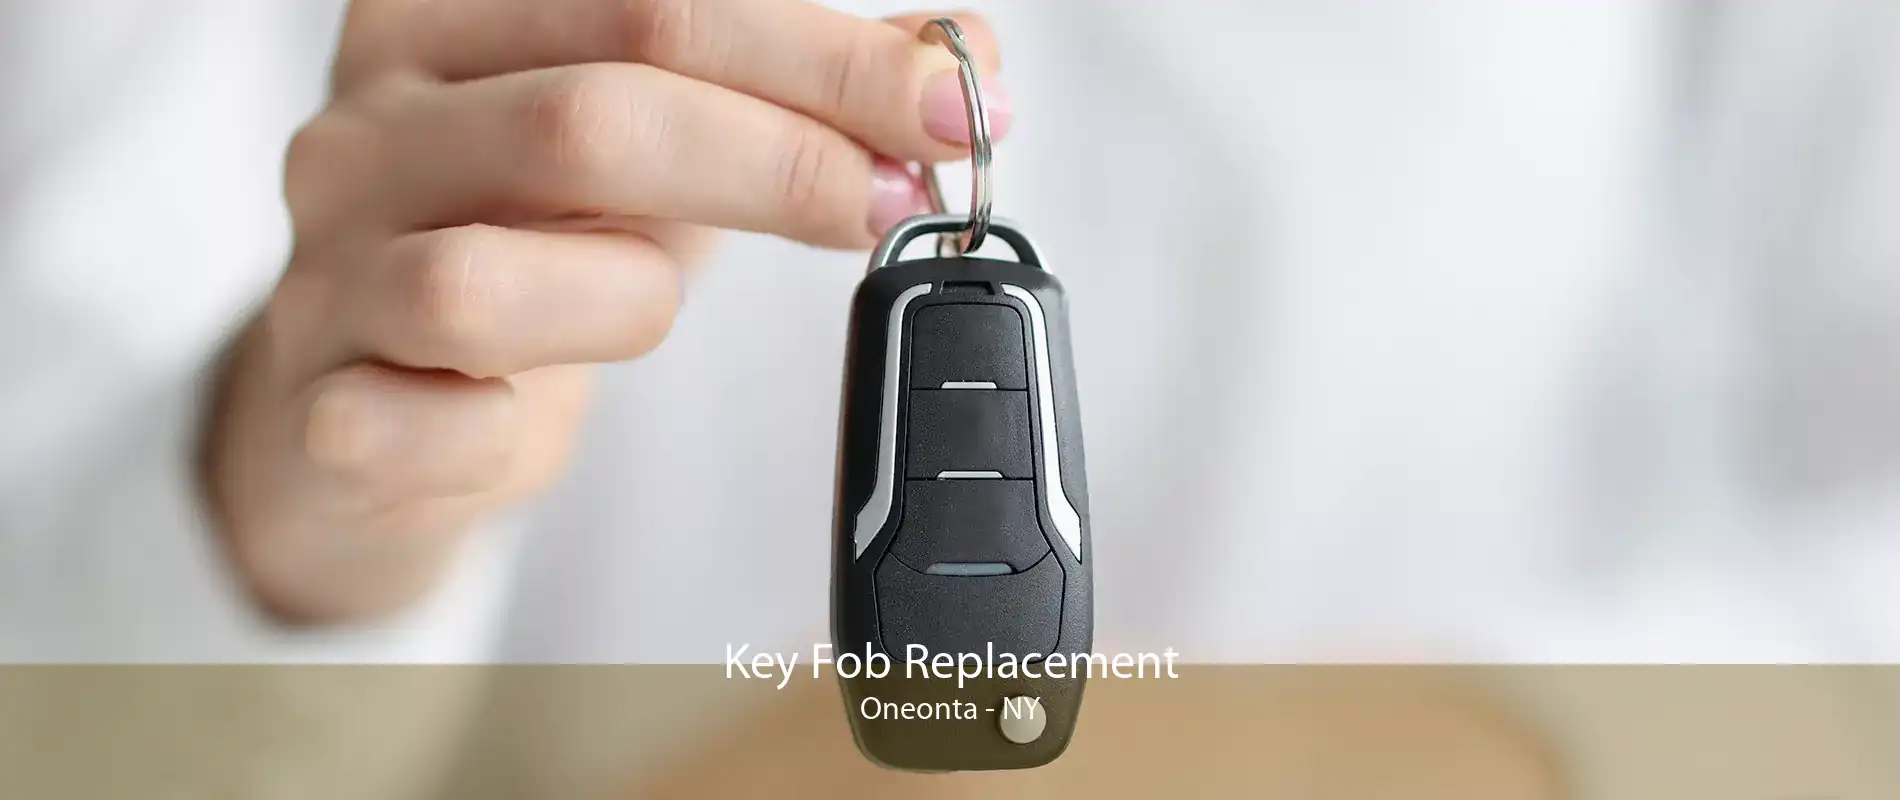 Key Fob Replacement Oneonta - NY